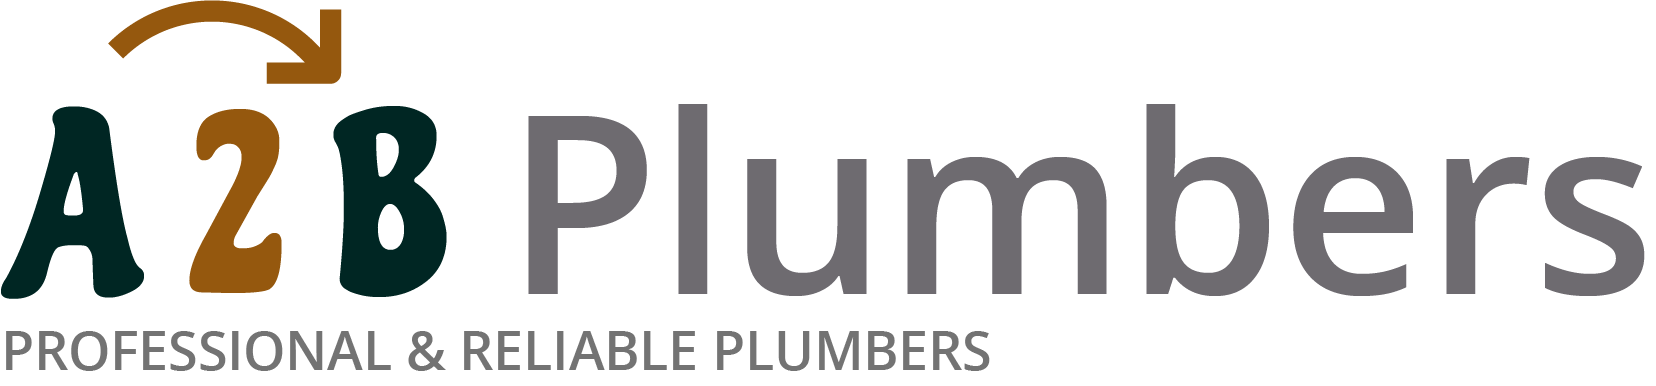 If you need a boiler installed, a radiator repaired or a leaking tap fixed, call us now - we provide services for properties in Felling and the local area.